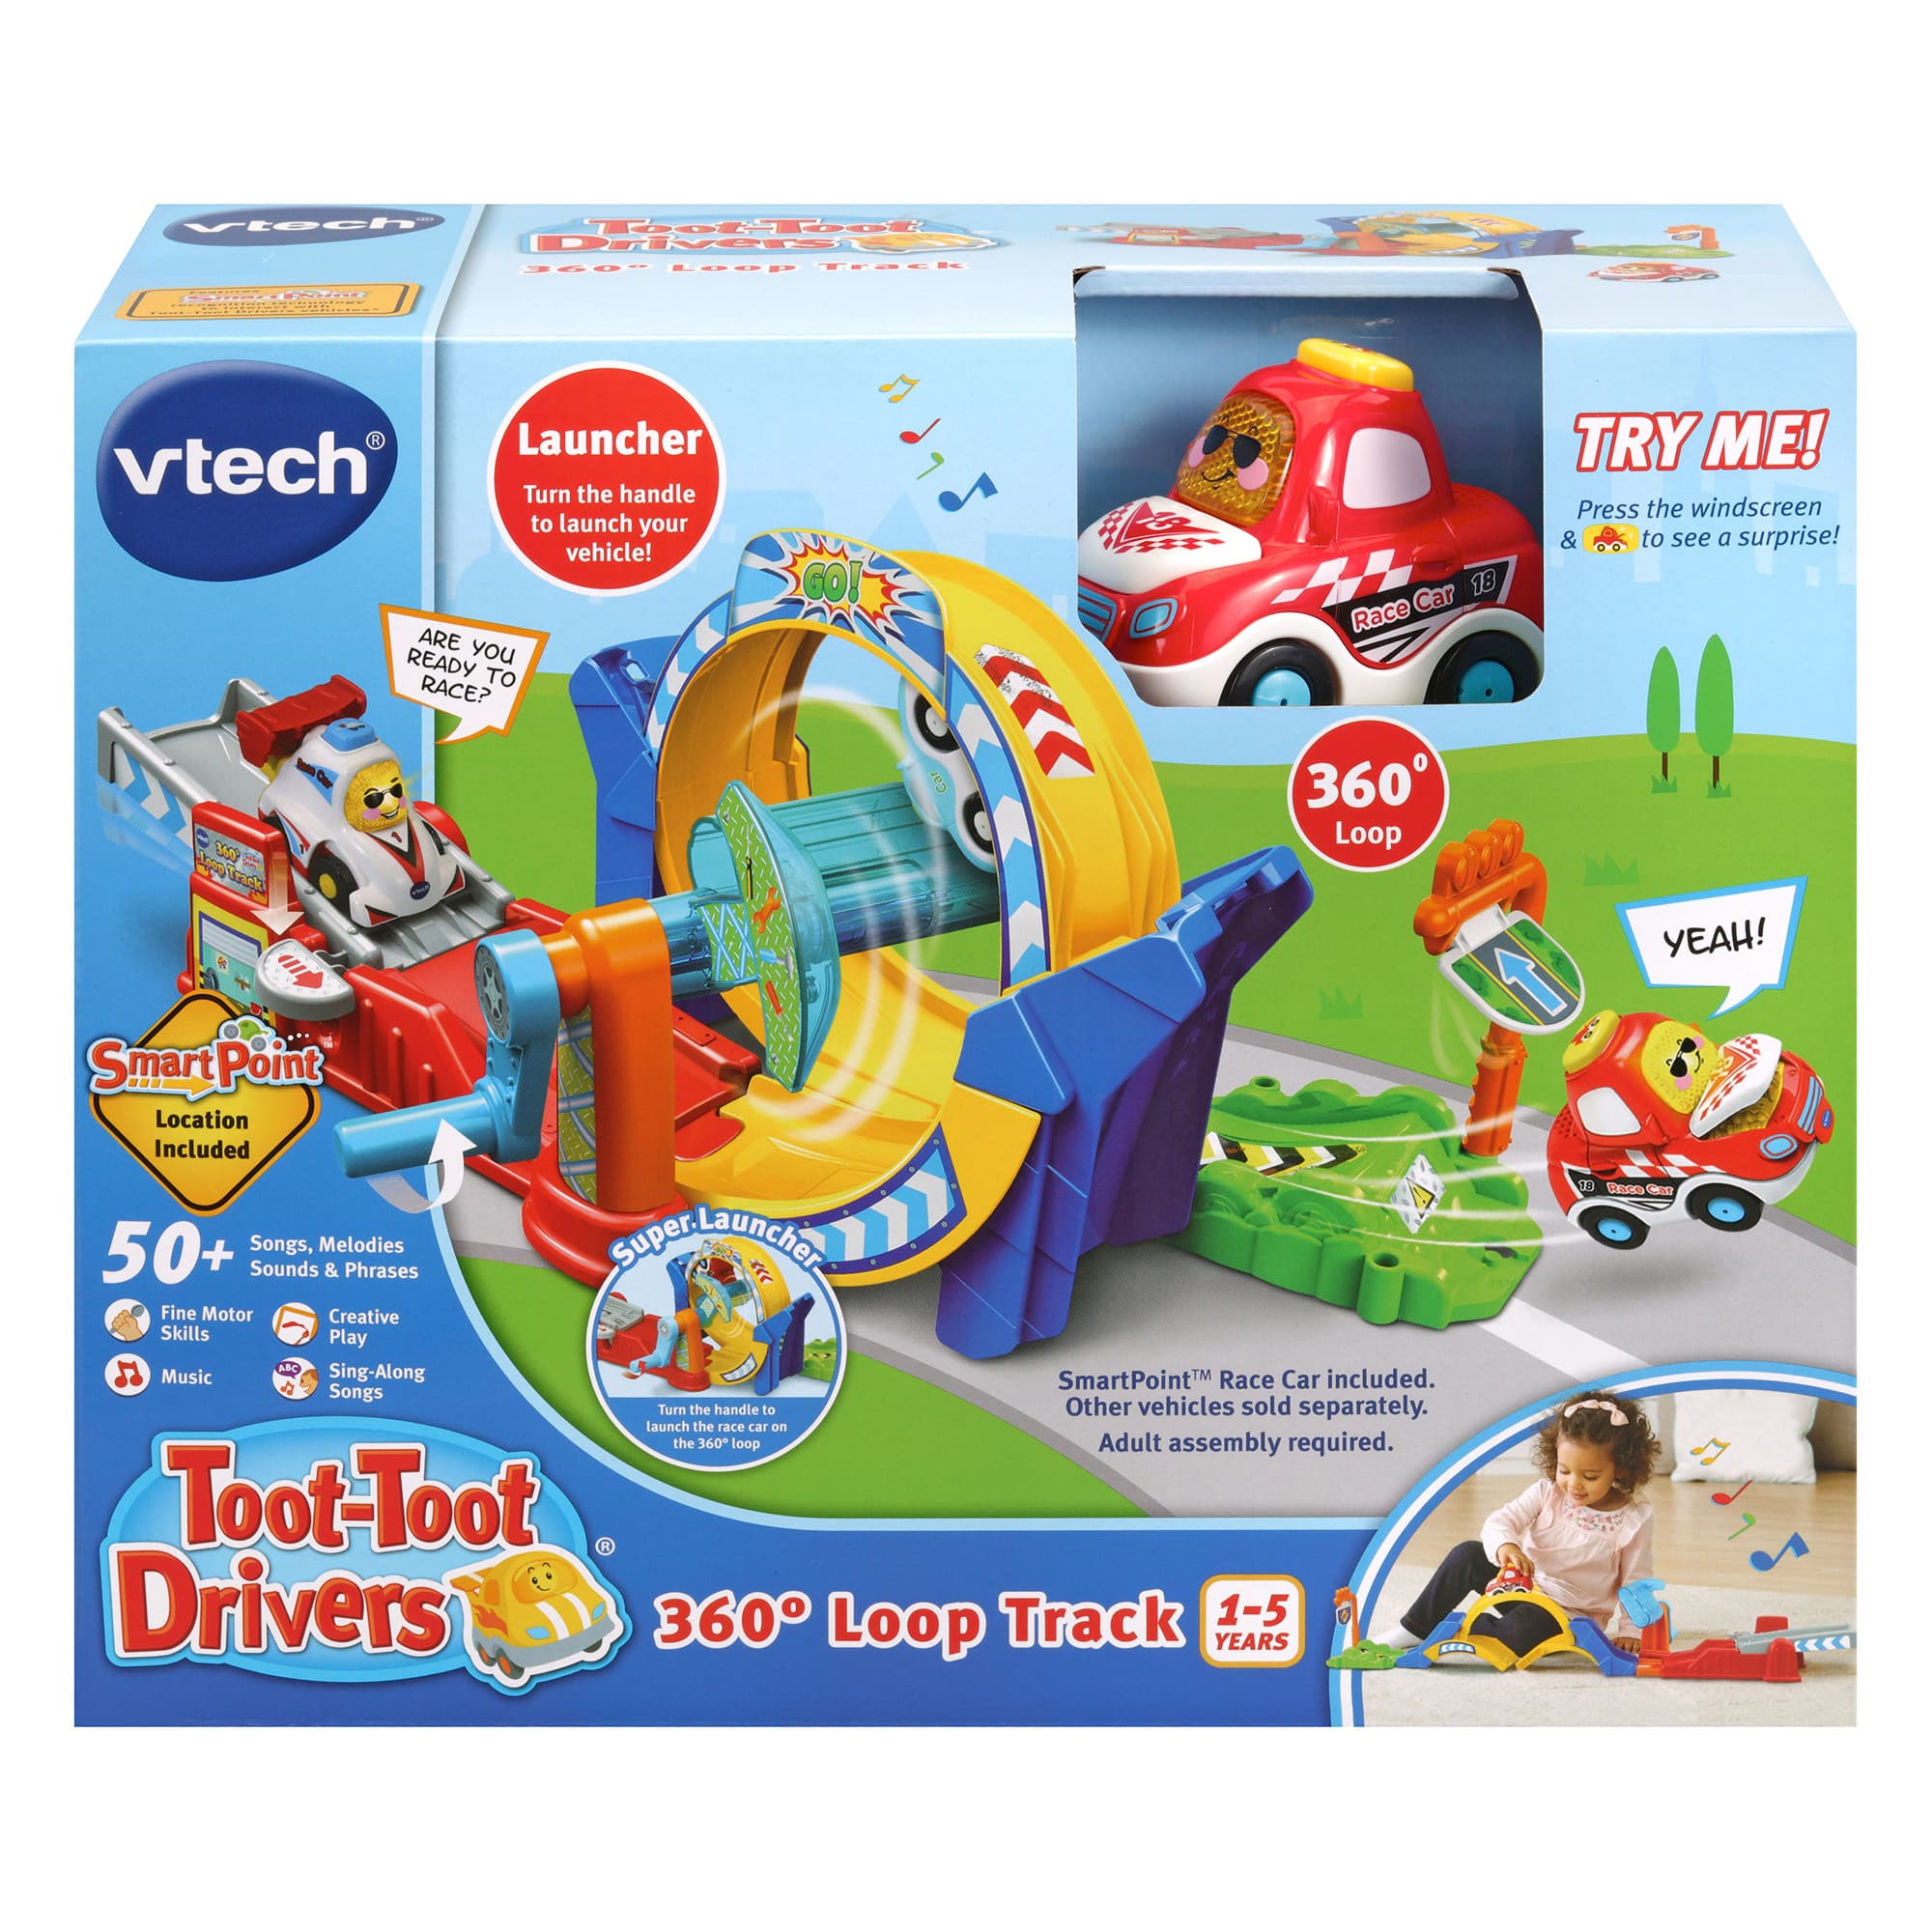 Vtech - Toot Toot Drivers - 360-Degree Loop Track